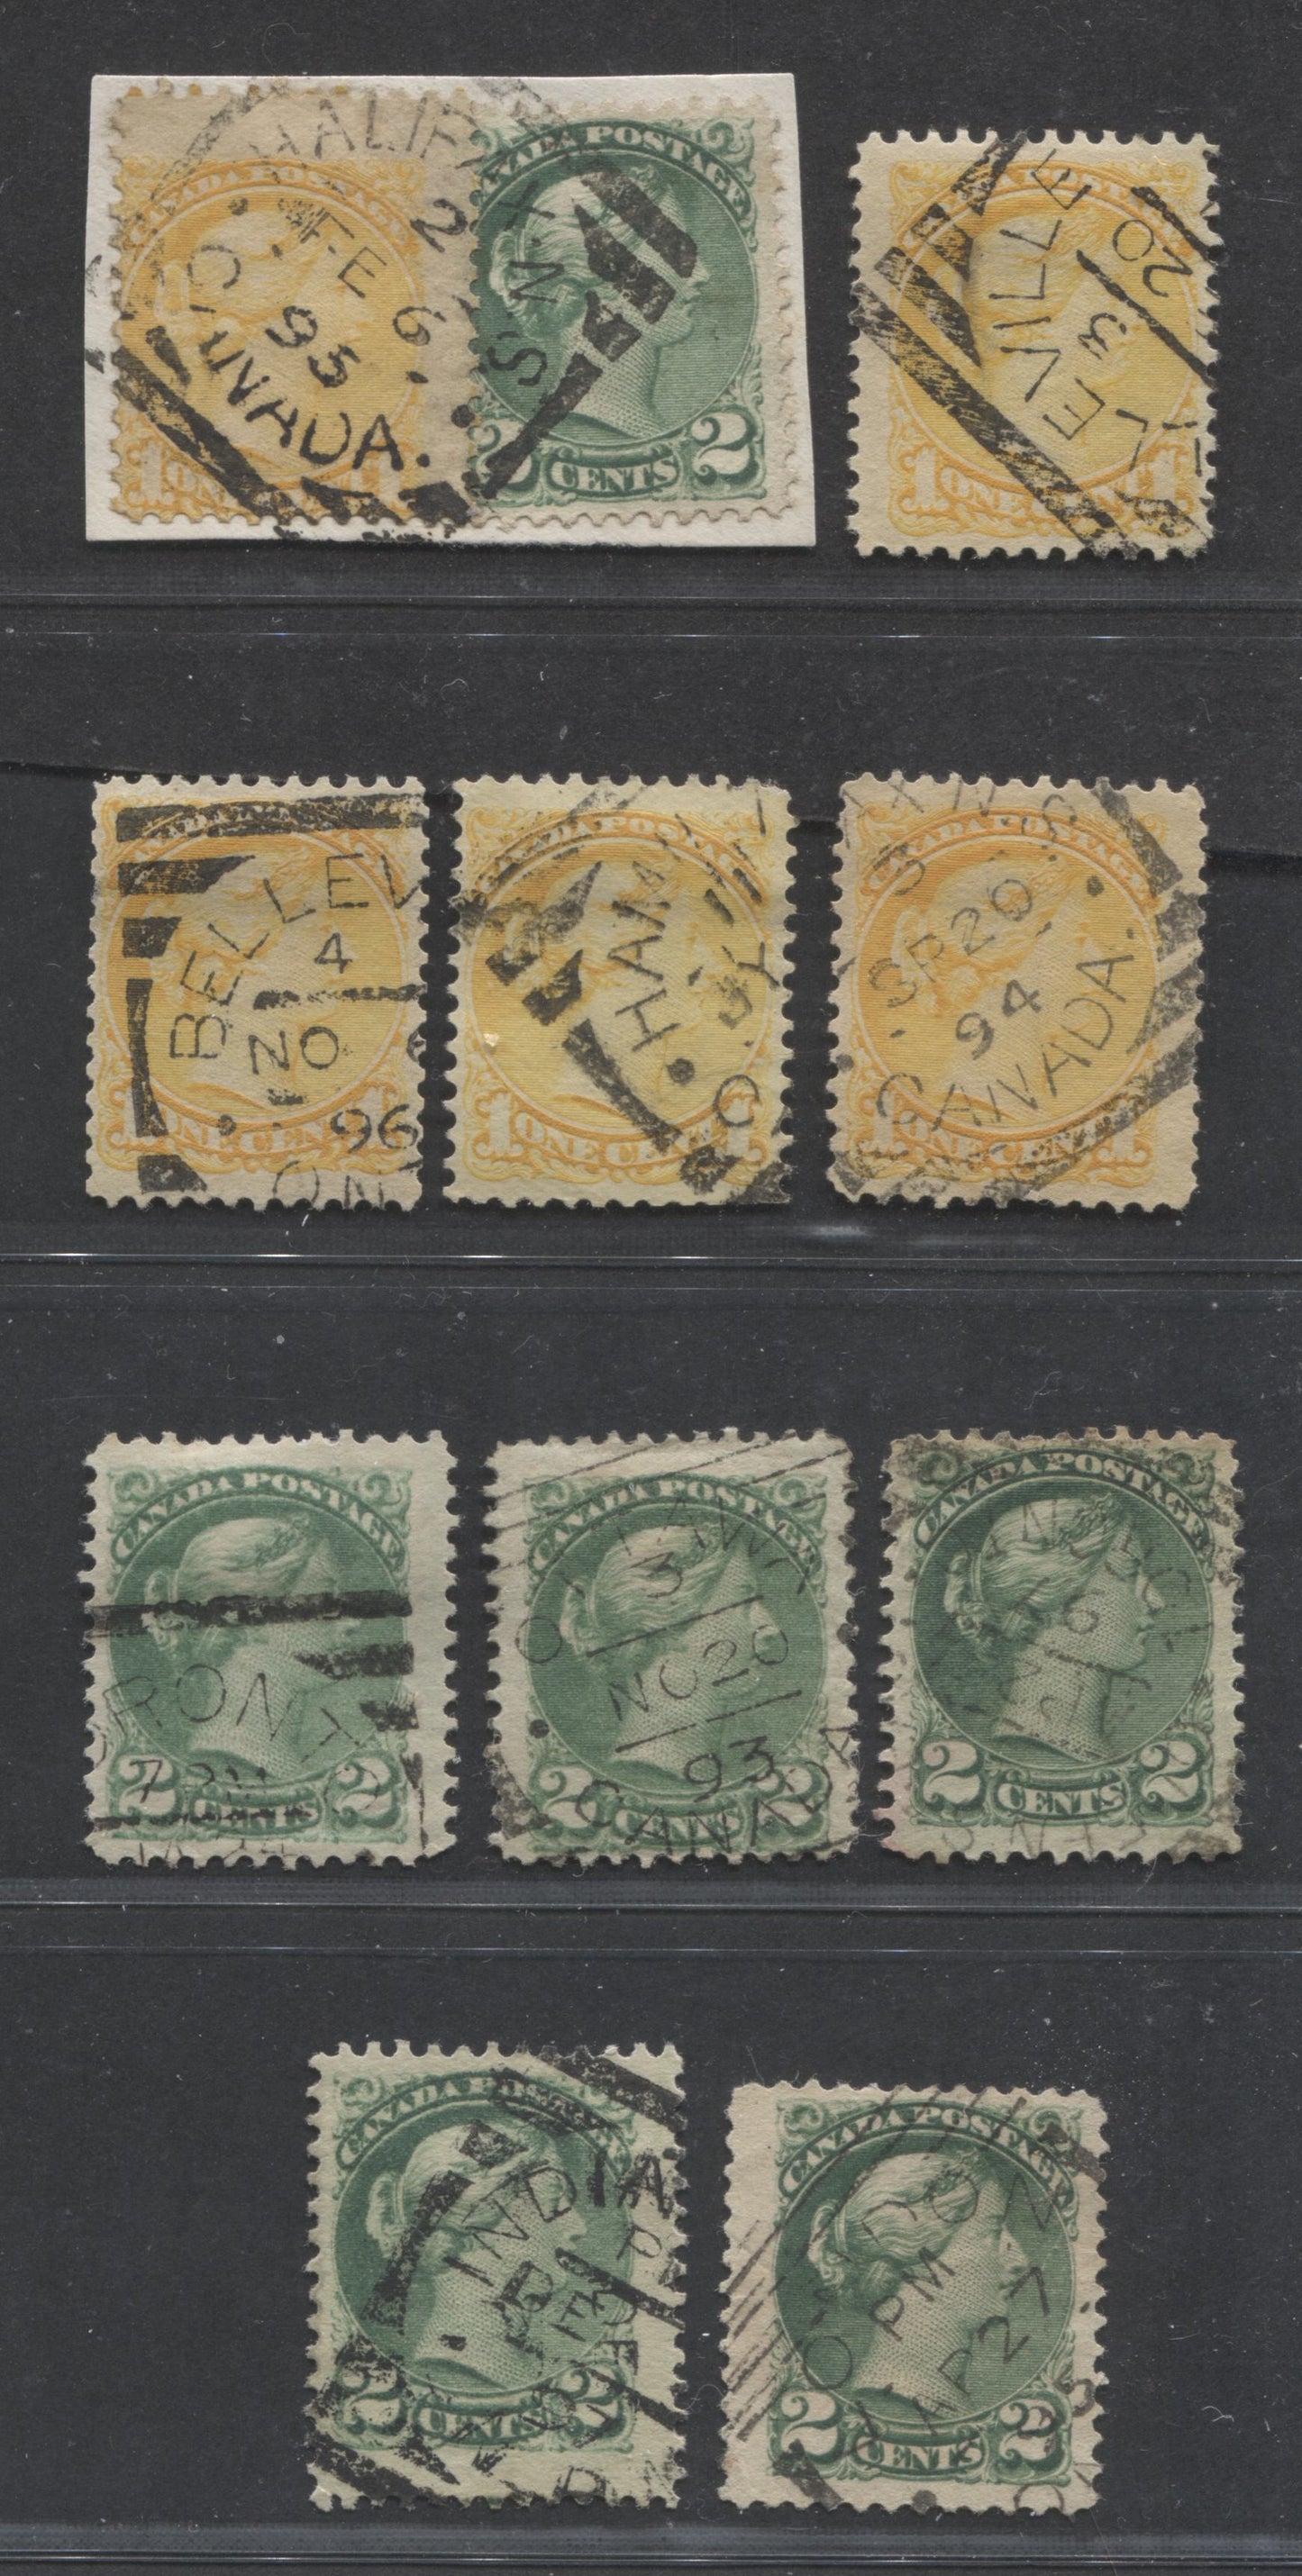 Lot 206 Canada #35, 36i 1c, 2c Yellow & Green Queen Victoria, 1870-1897 Small Queen Issue, 11 Fine & VF Used Singles, All With Full to Partial, Dated Squared Circle Cancels, 2nd Ottawa Printings